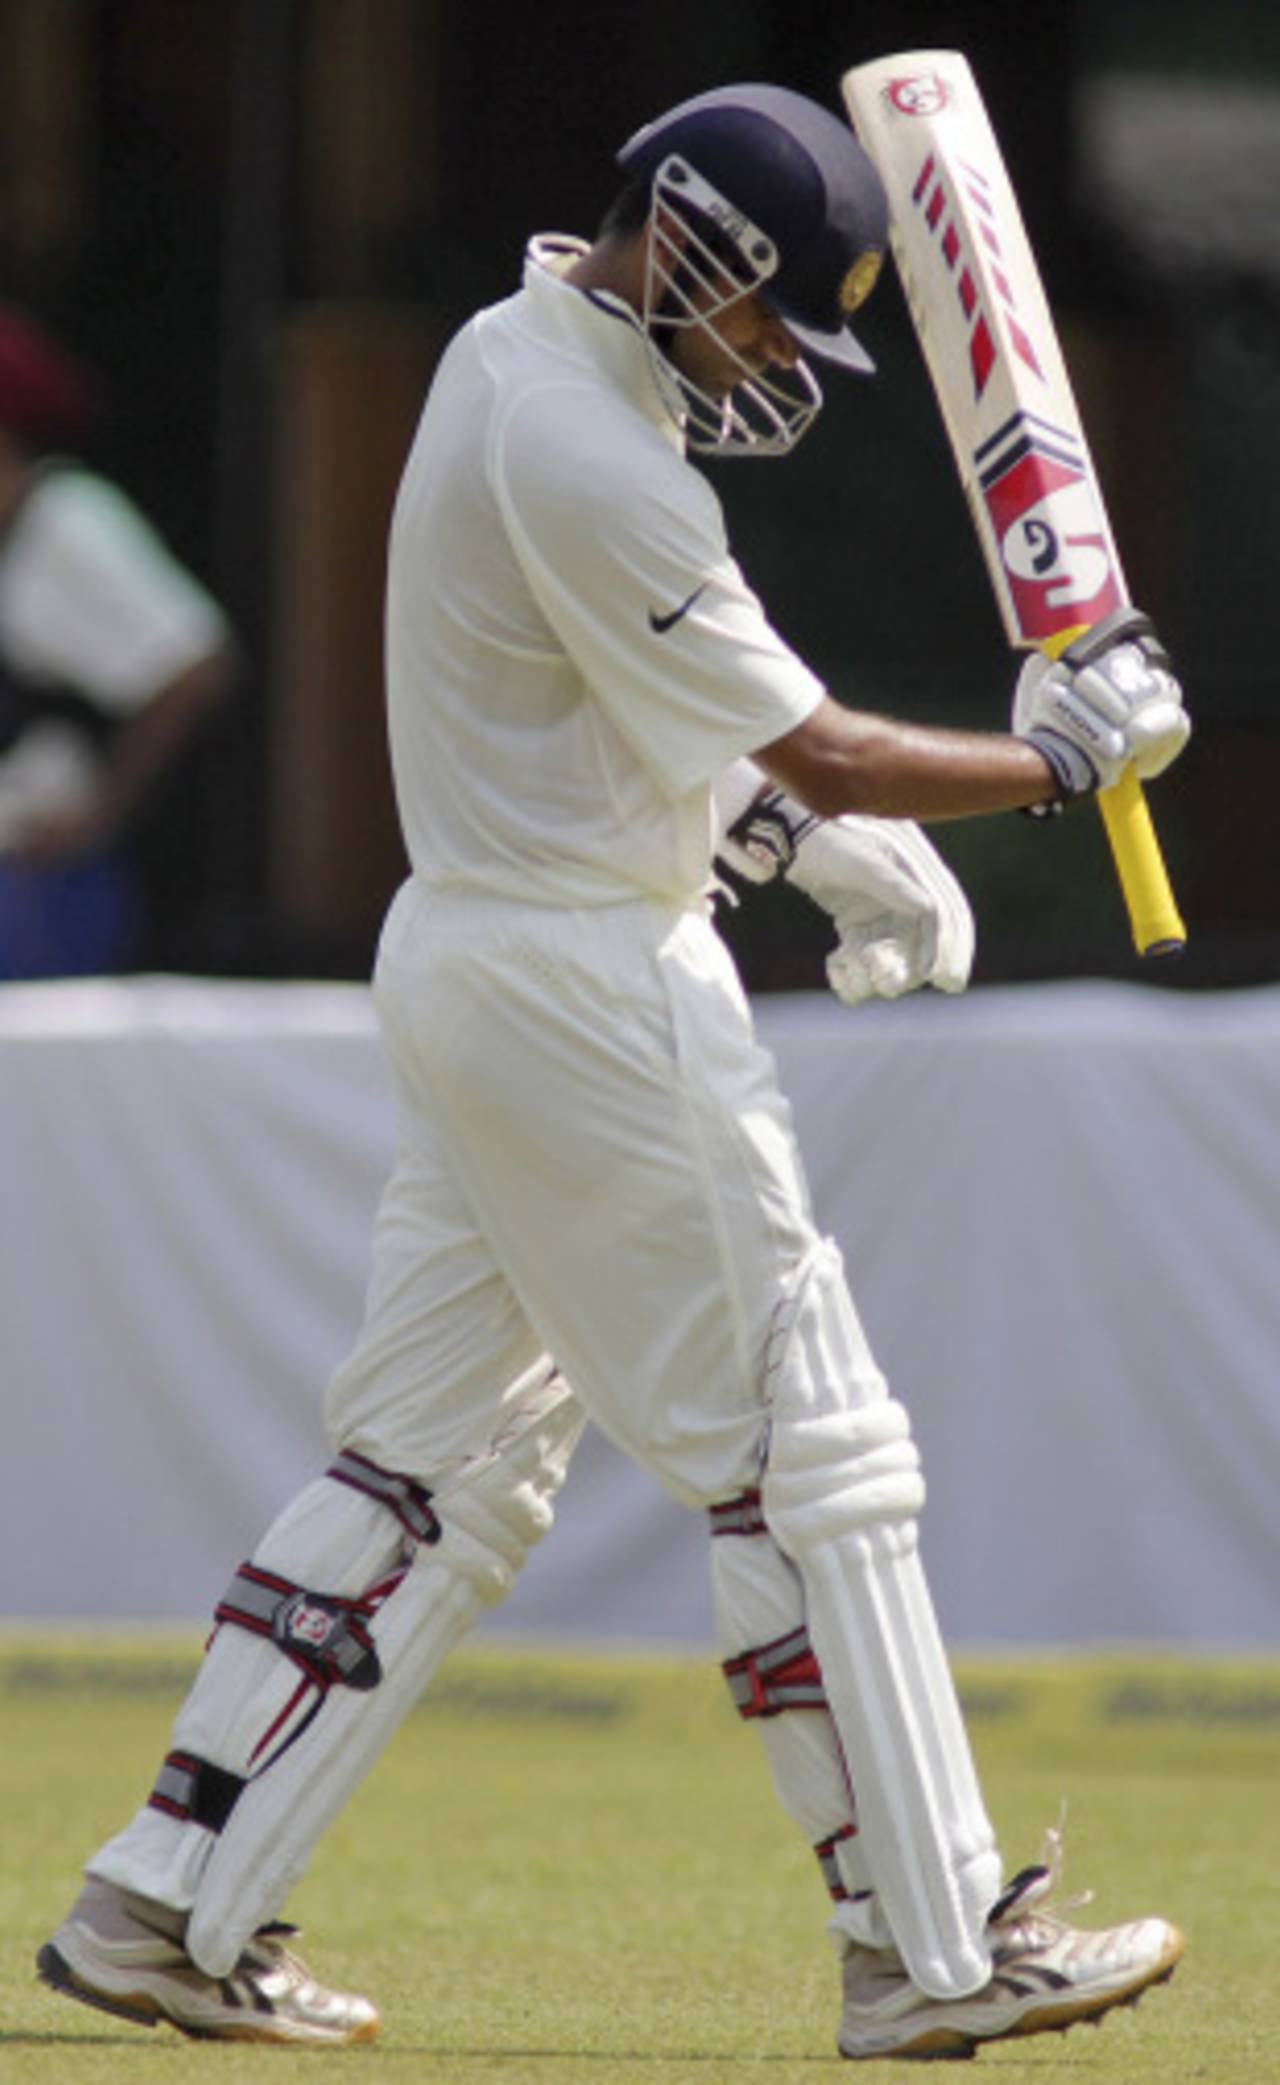 A frustrated Rahul Dravid has been a common sight recently&nbsp;&nbsp;&bull;&nbsp;&nbsp;Associated Press